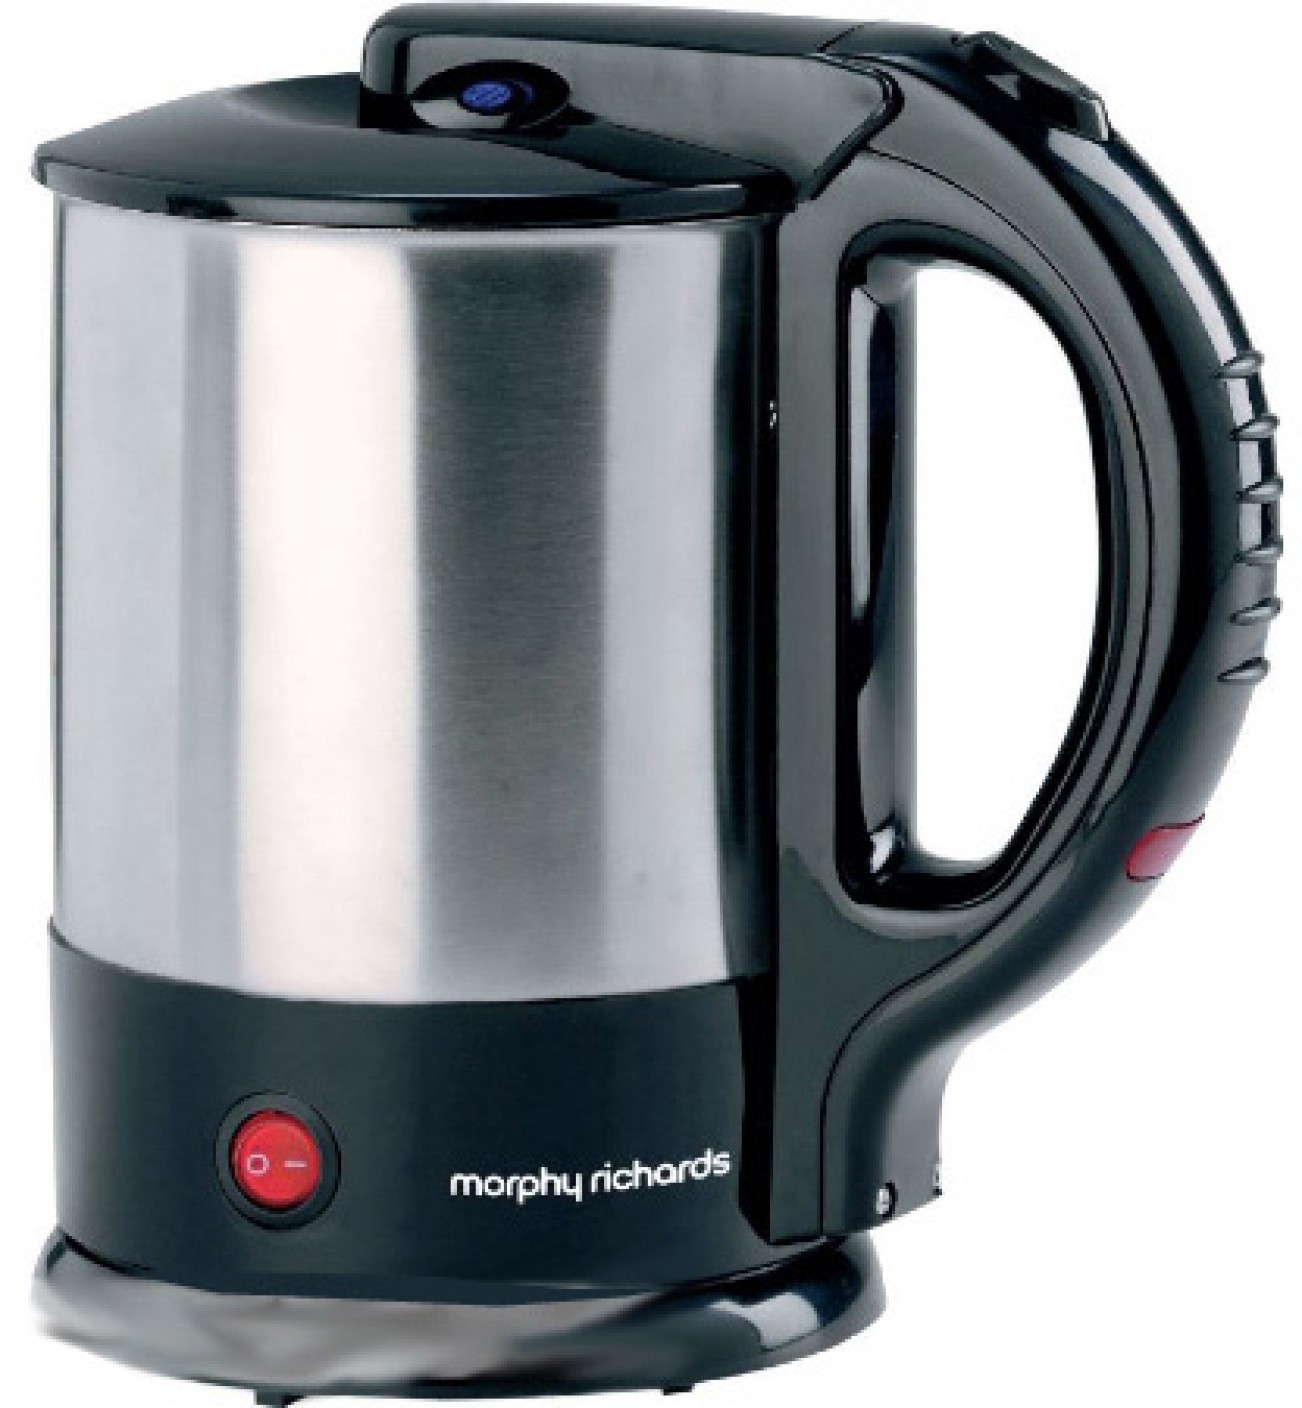 Morphy Richards Tea Maker Electric Kettle Price In India Buy